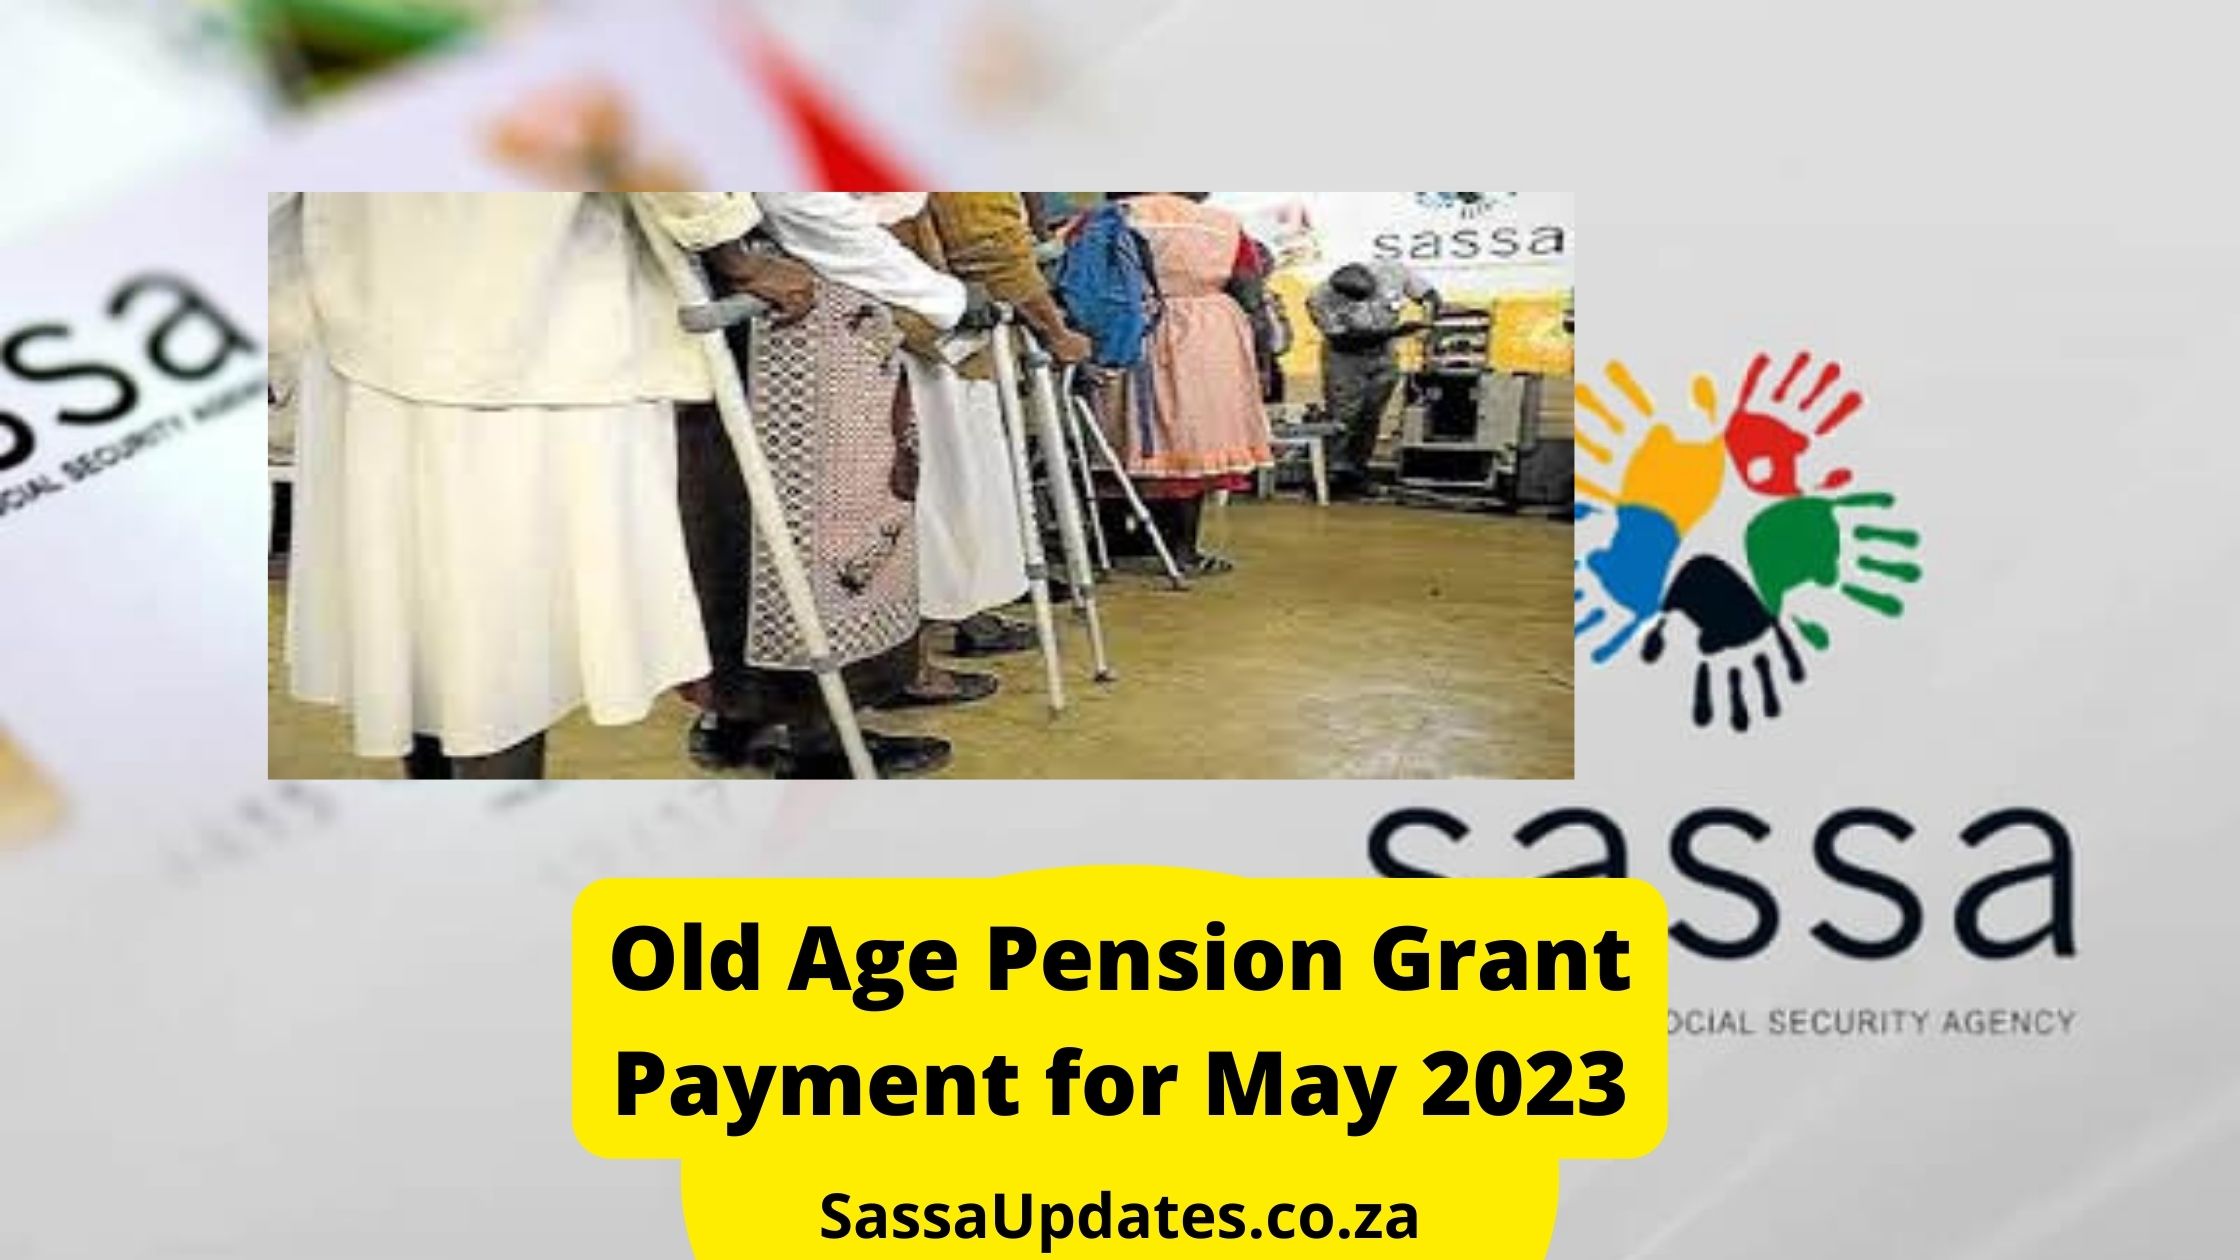 Old Age Pension Grant Payment for May 2023